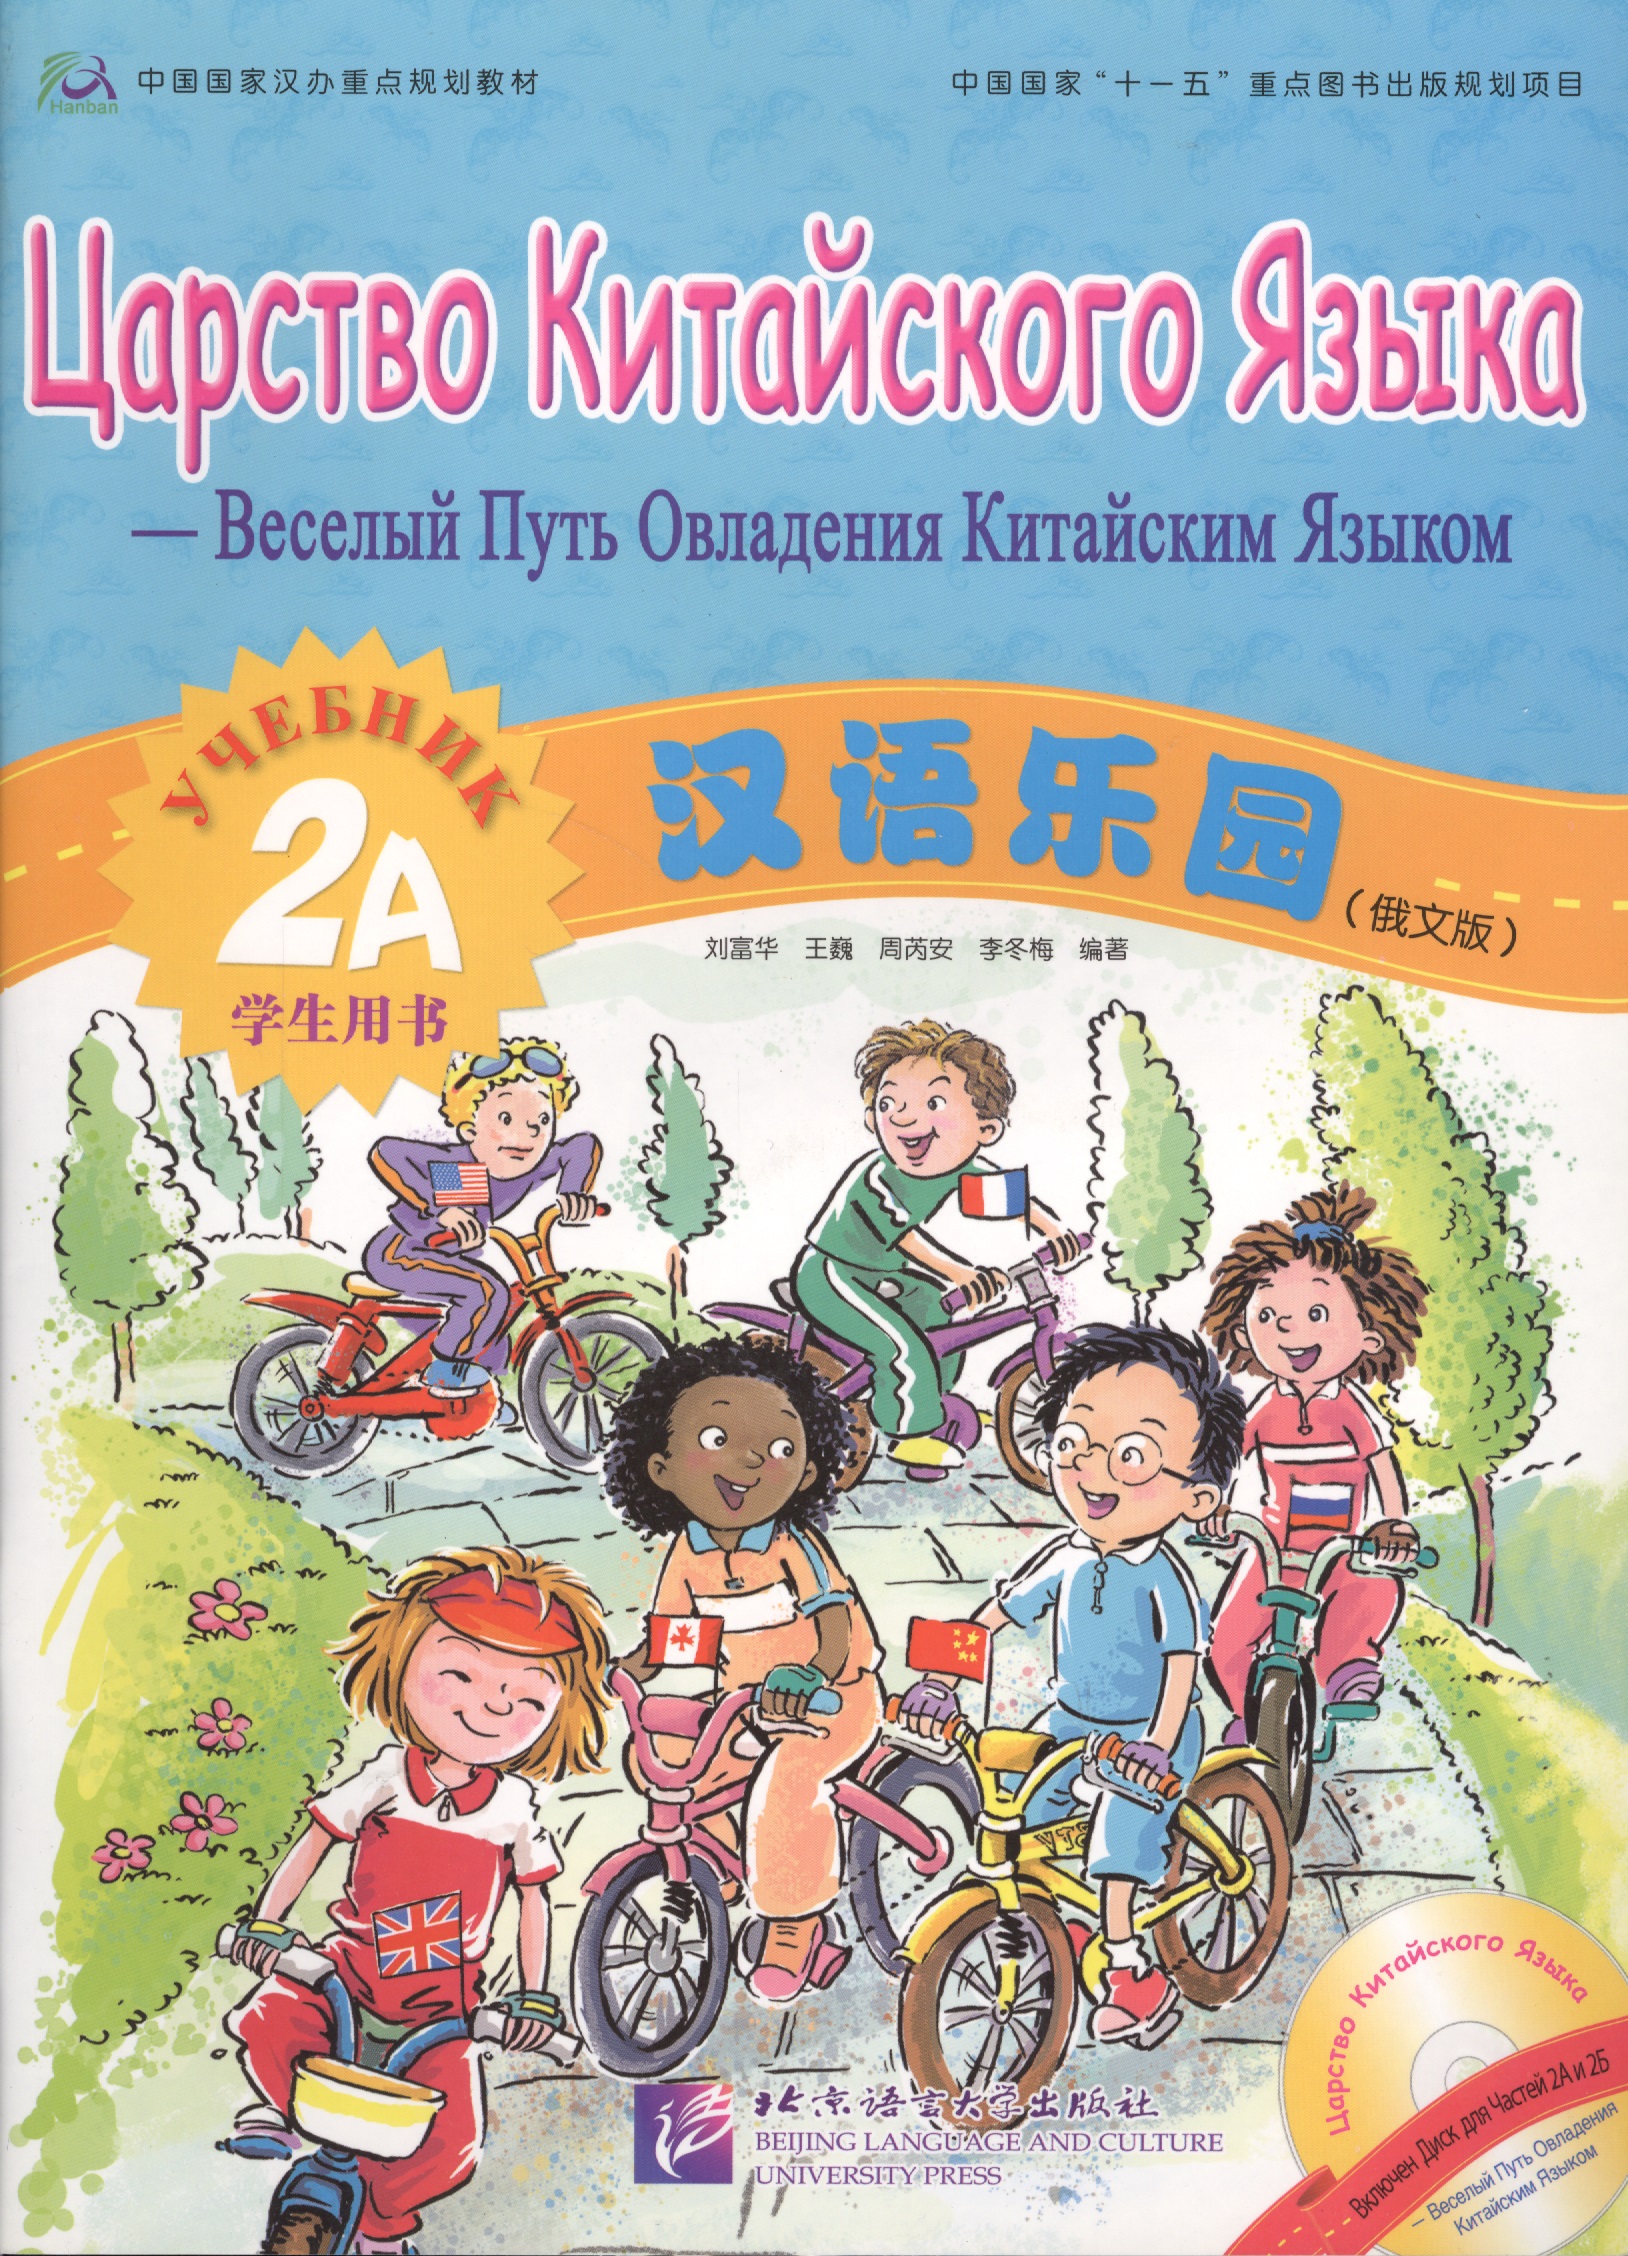 Fuhua L. Chinese Paradise (Russian edition) 2A / Царство китайского языка (русское издание) 2A - Students book with CD